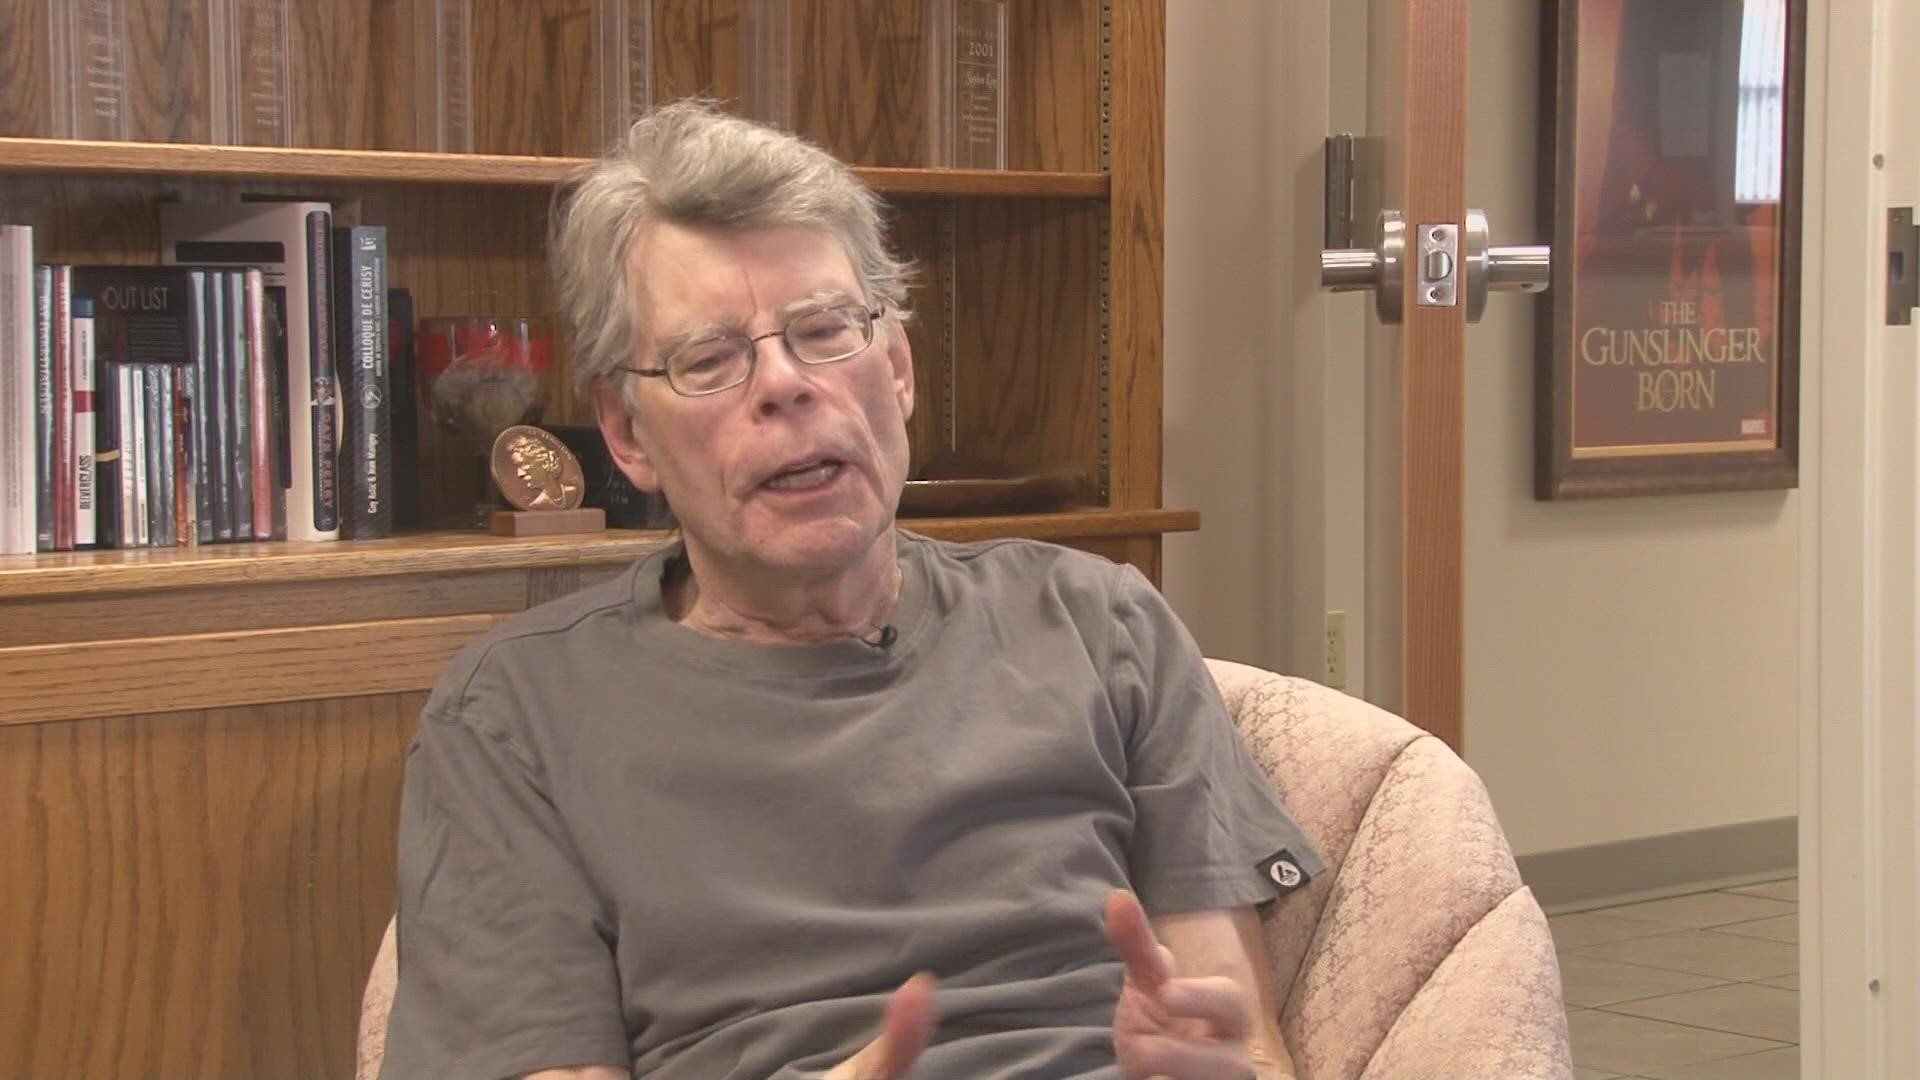 We're wishing 'Happy Birthday' to one of Maine's most well-known authors, Stephen King.